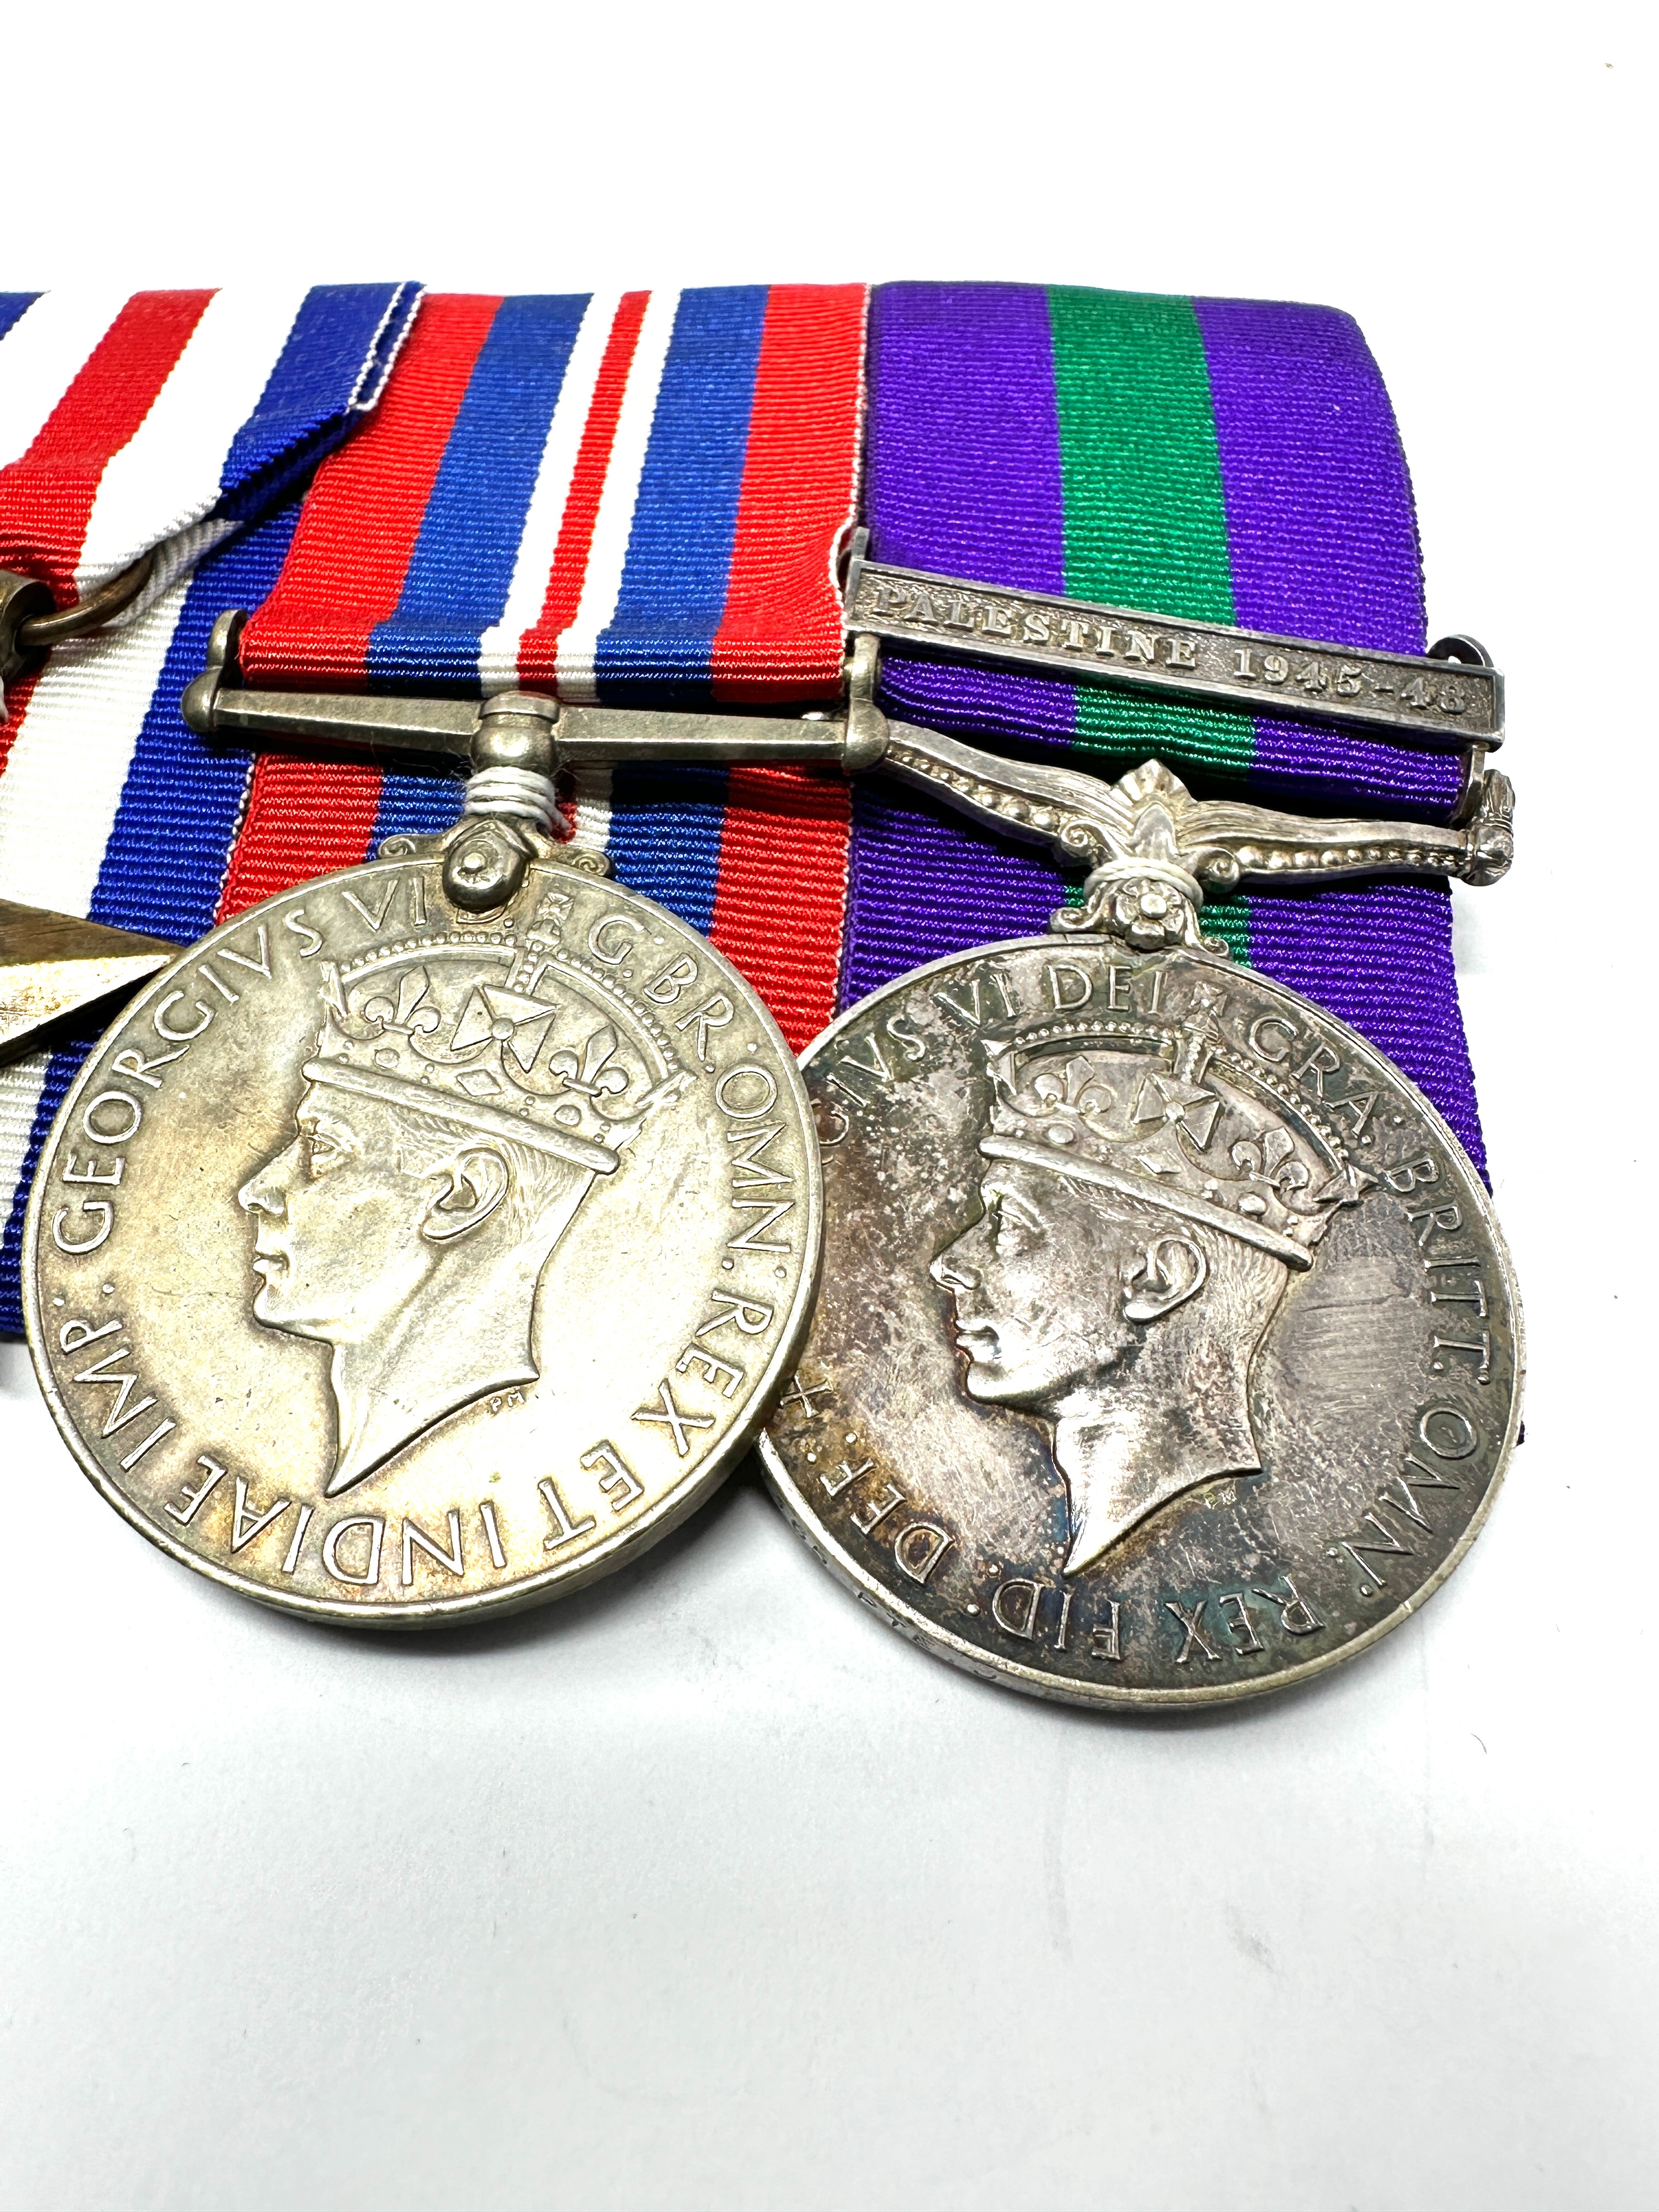 1939-45 ww2 G.S.M medal group mounted Palestine bar to 14441365 pte j.s lennard oxy & bucks - Image 2 of 3